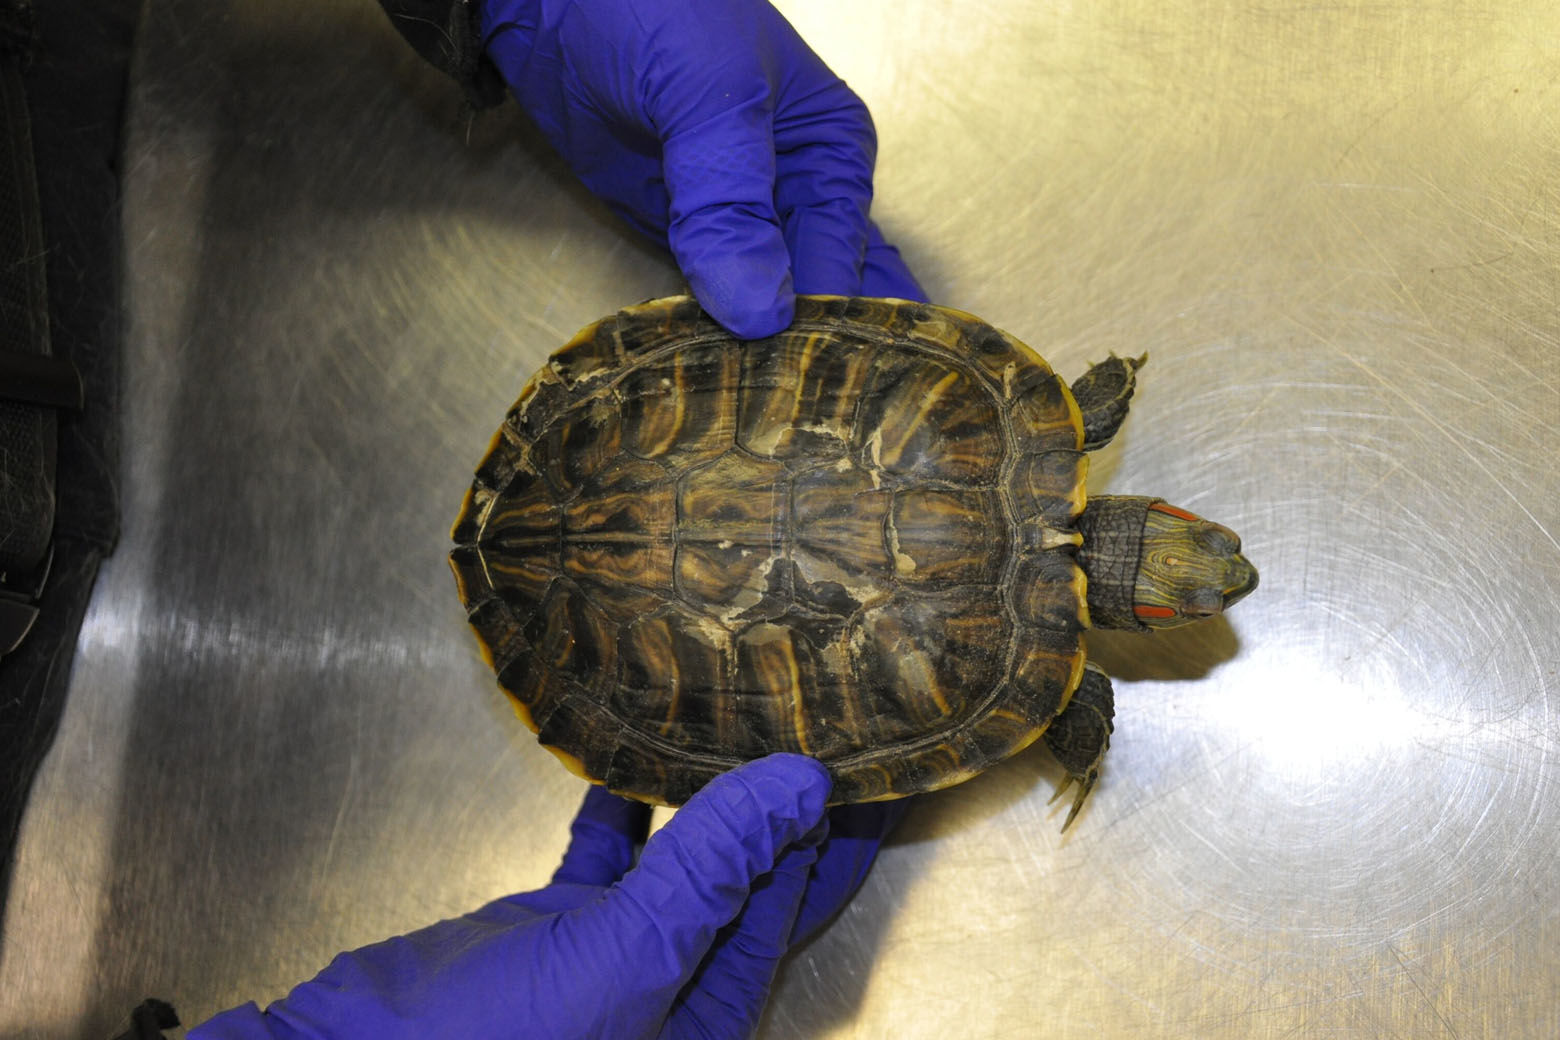 The turtles were confined in a tank with dirty water and appeared to have ammonia scalding on their skin and shells. (Courtesy Humane Rescue Alliance)